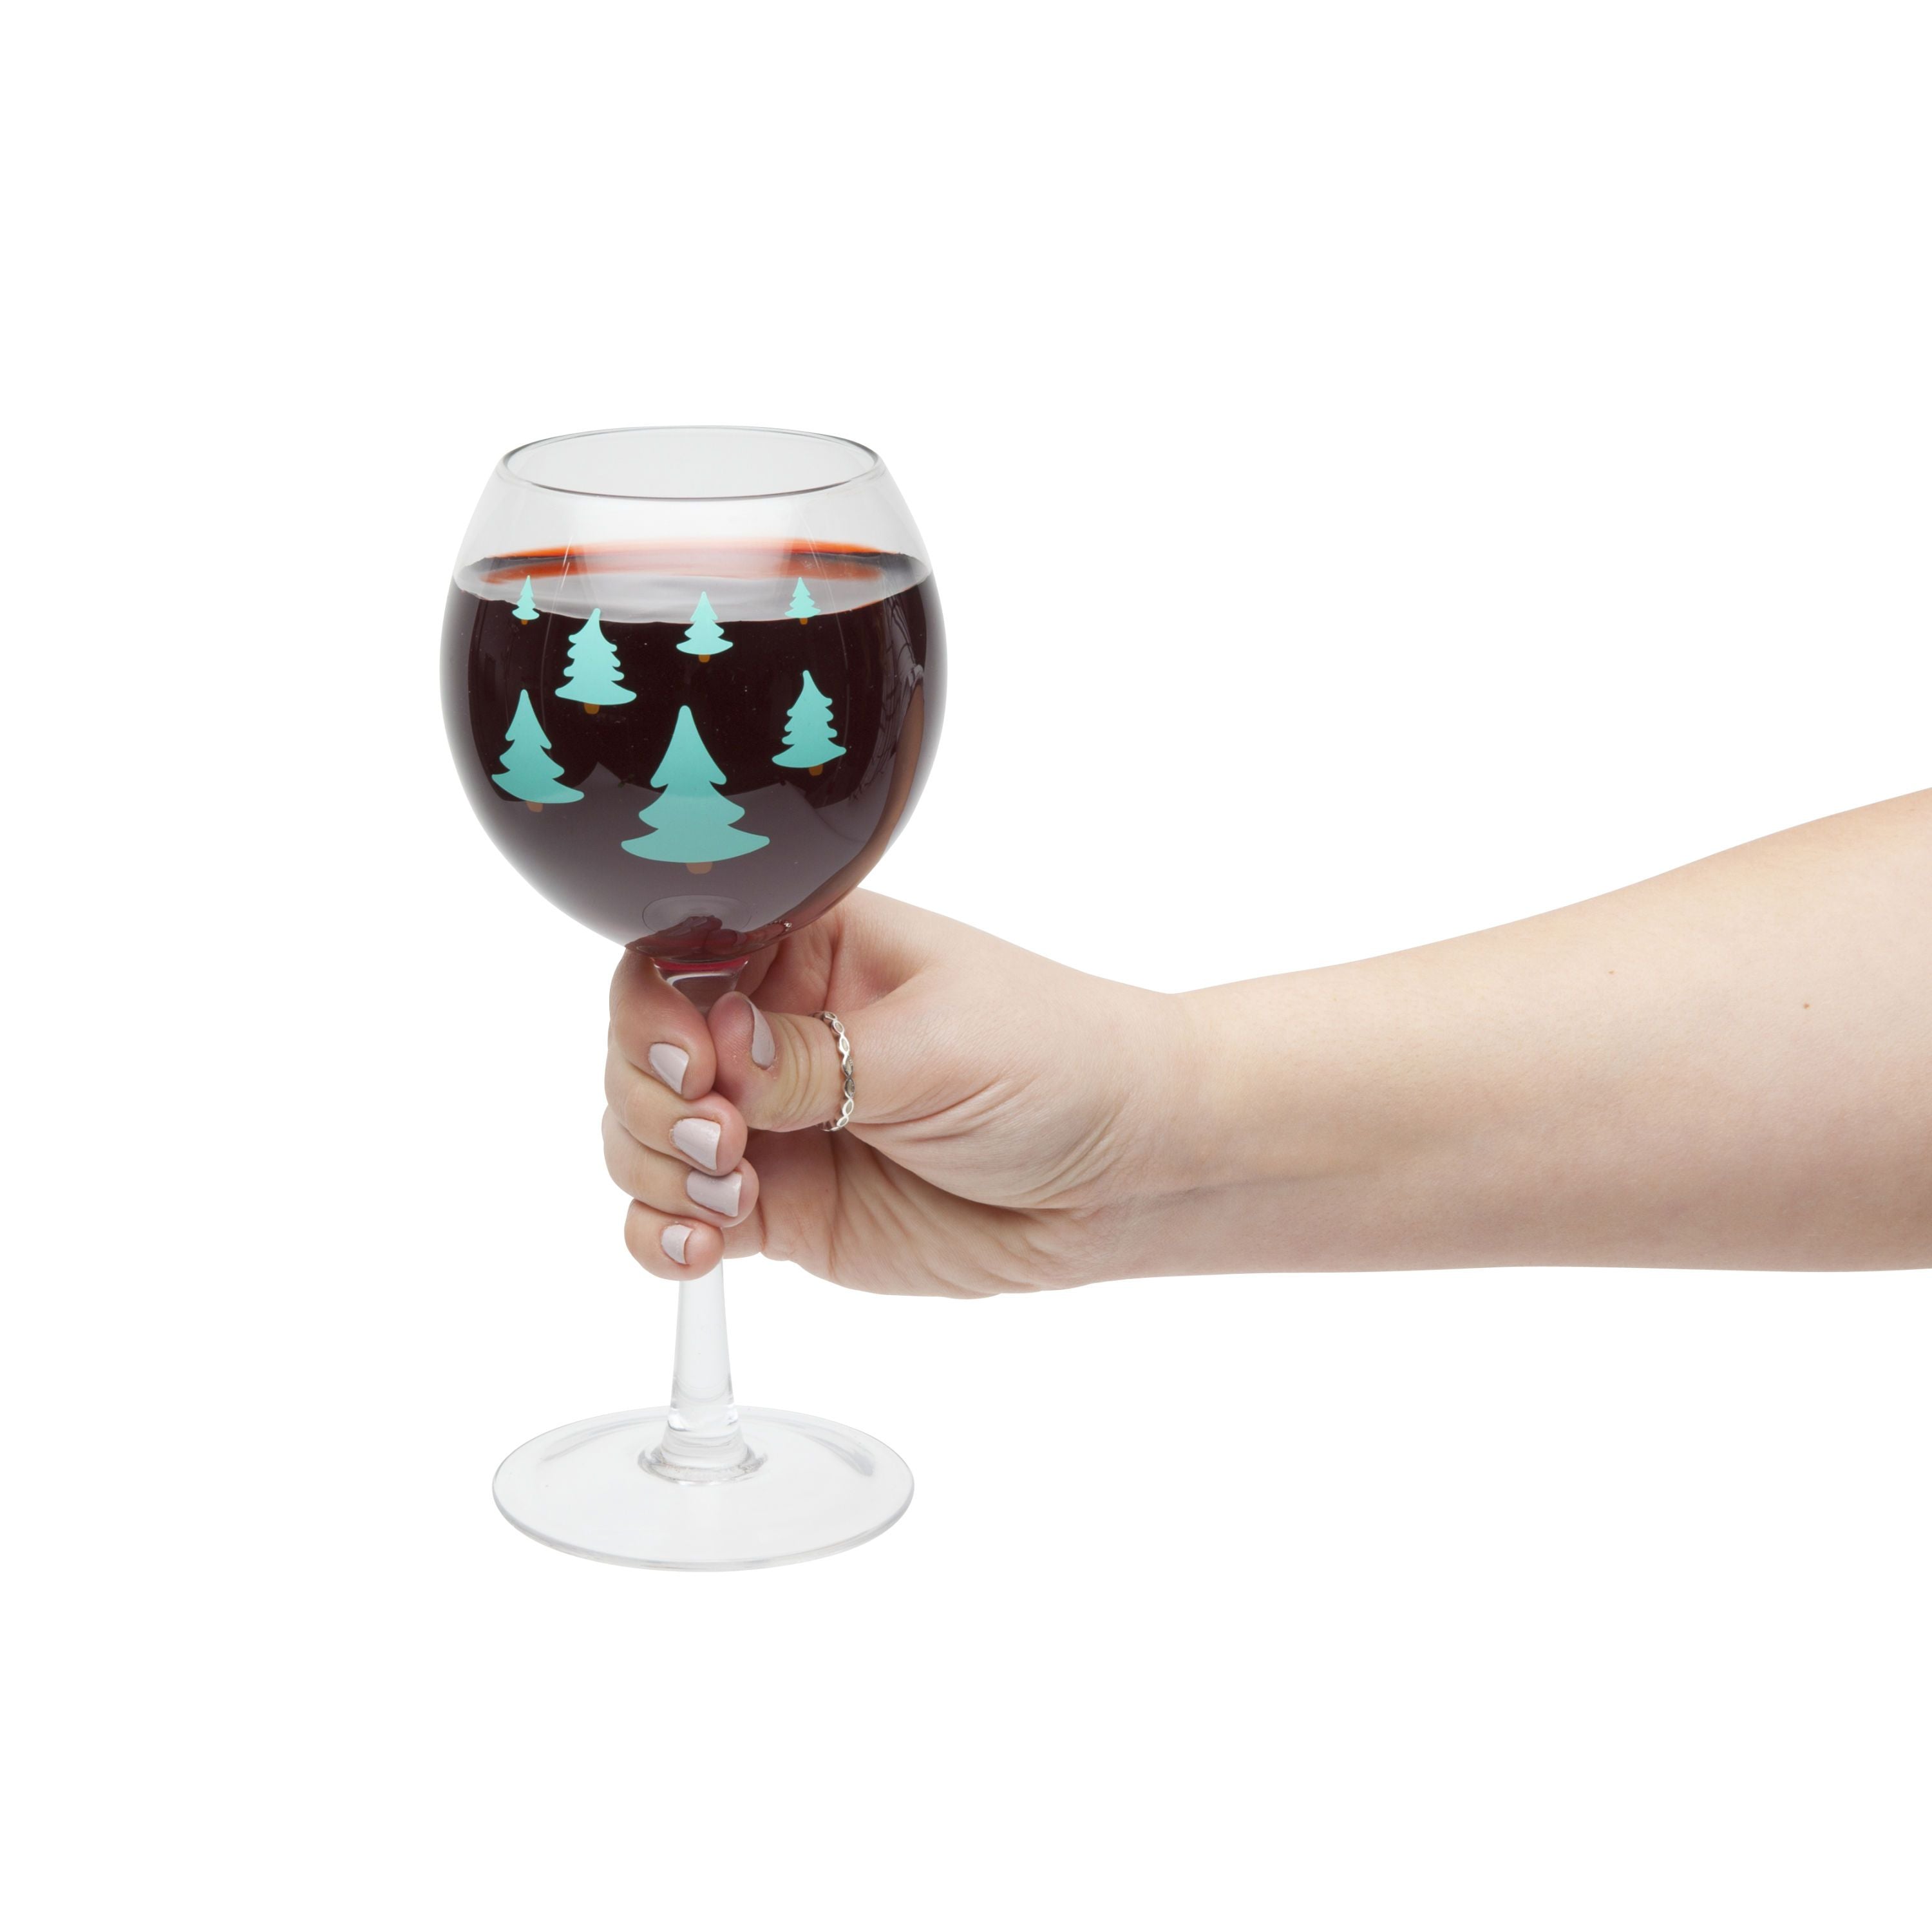 The Flannel Wine Glass